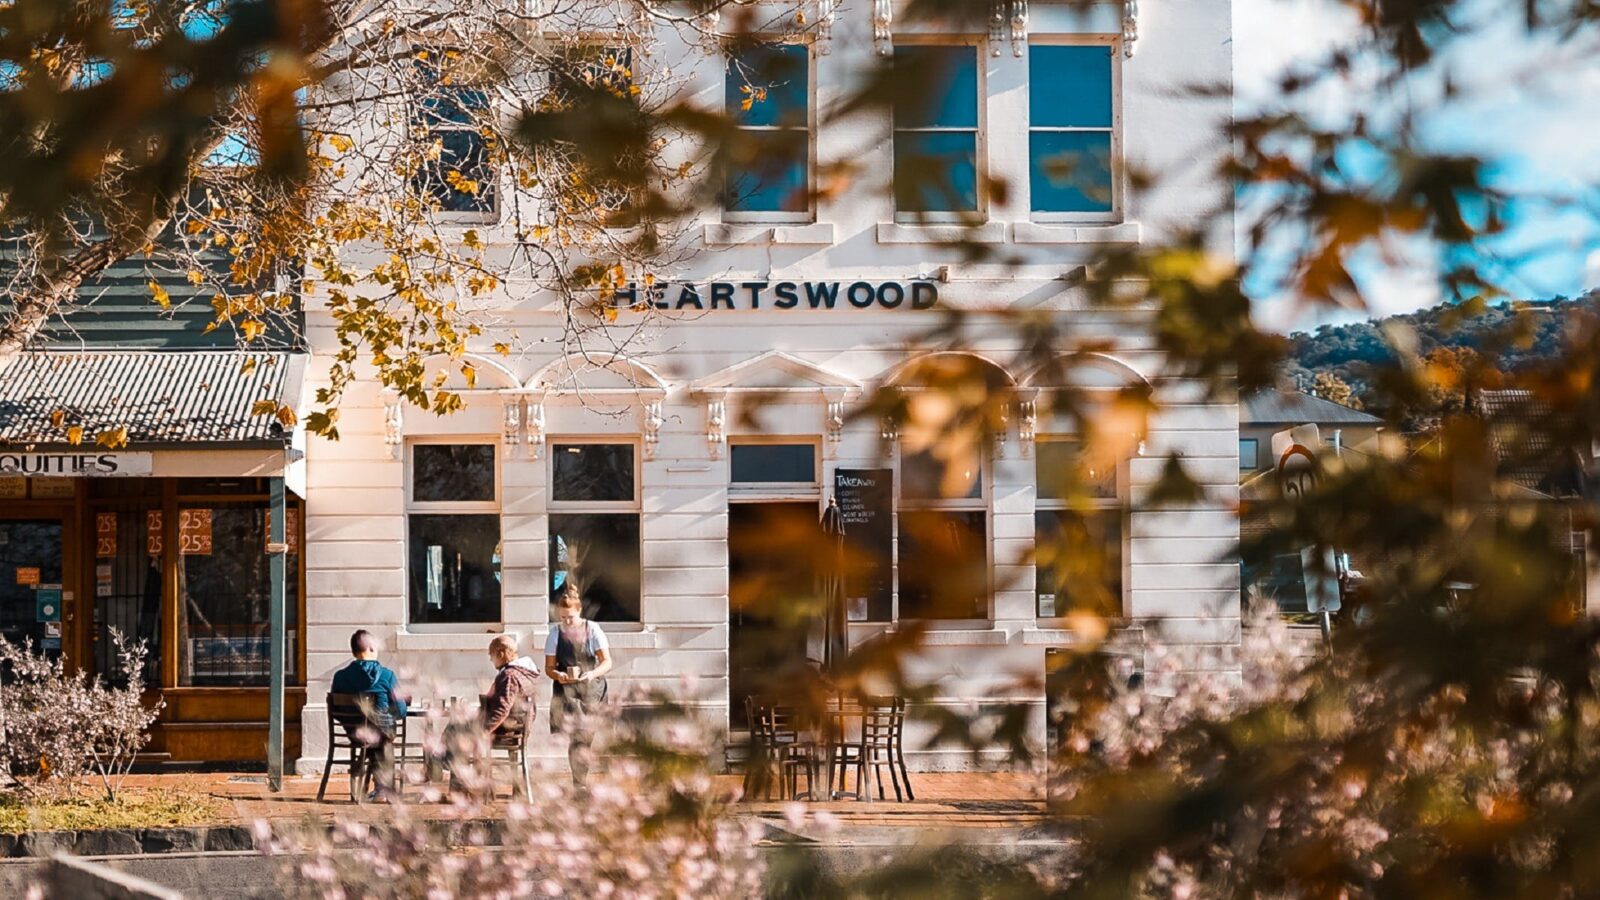 Heartswood has ample outdoor dining with street side tables and a rear outdoor courtyard